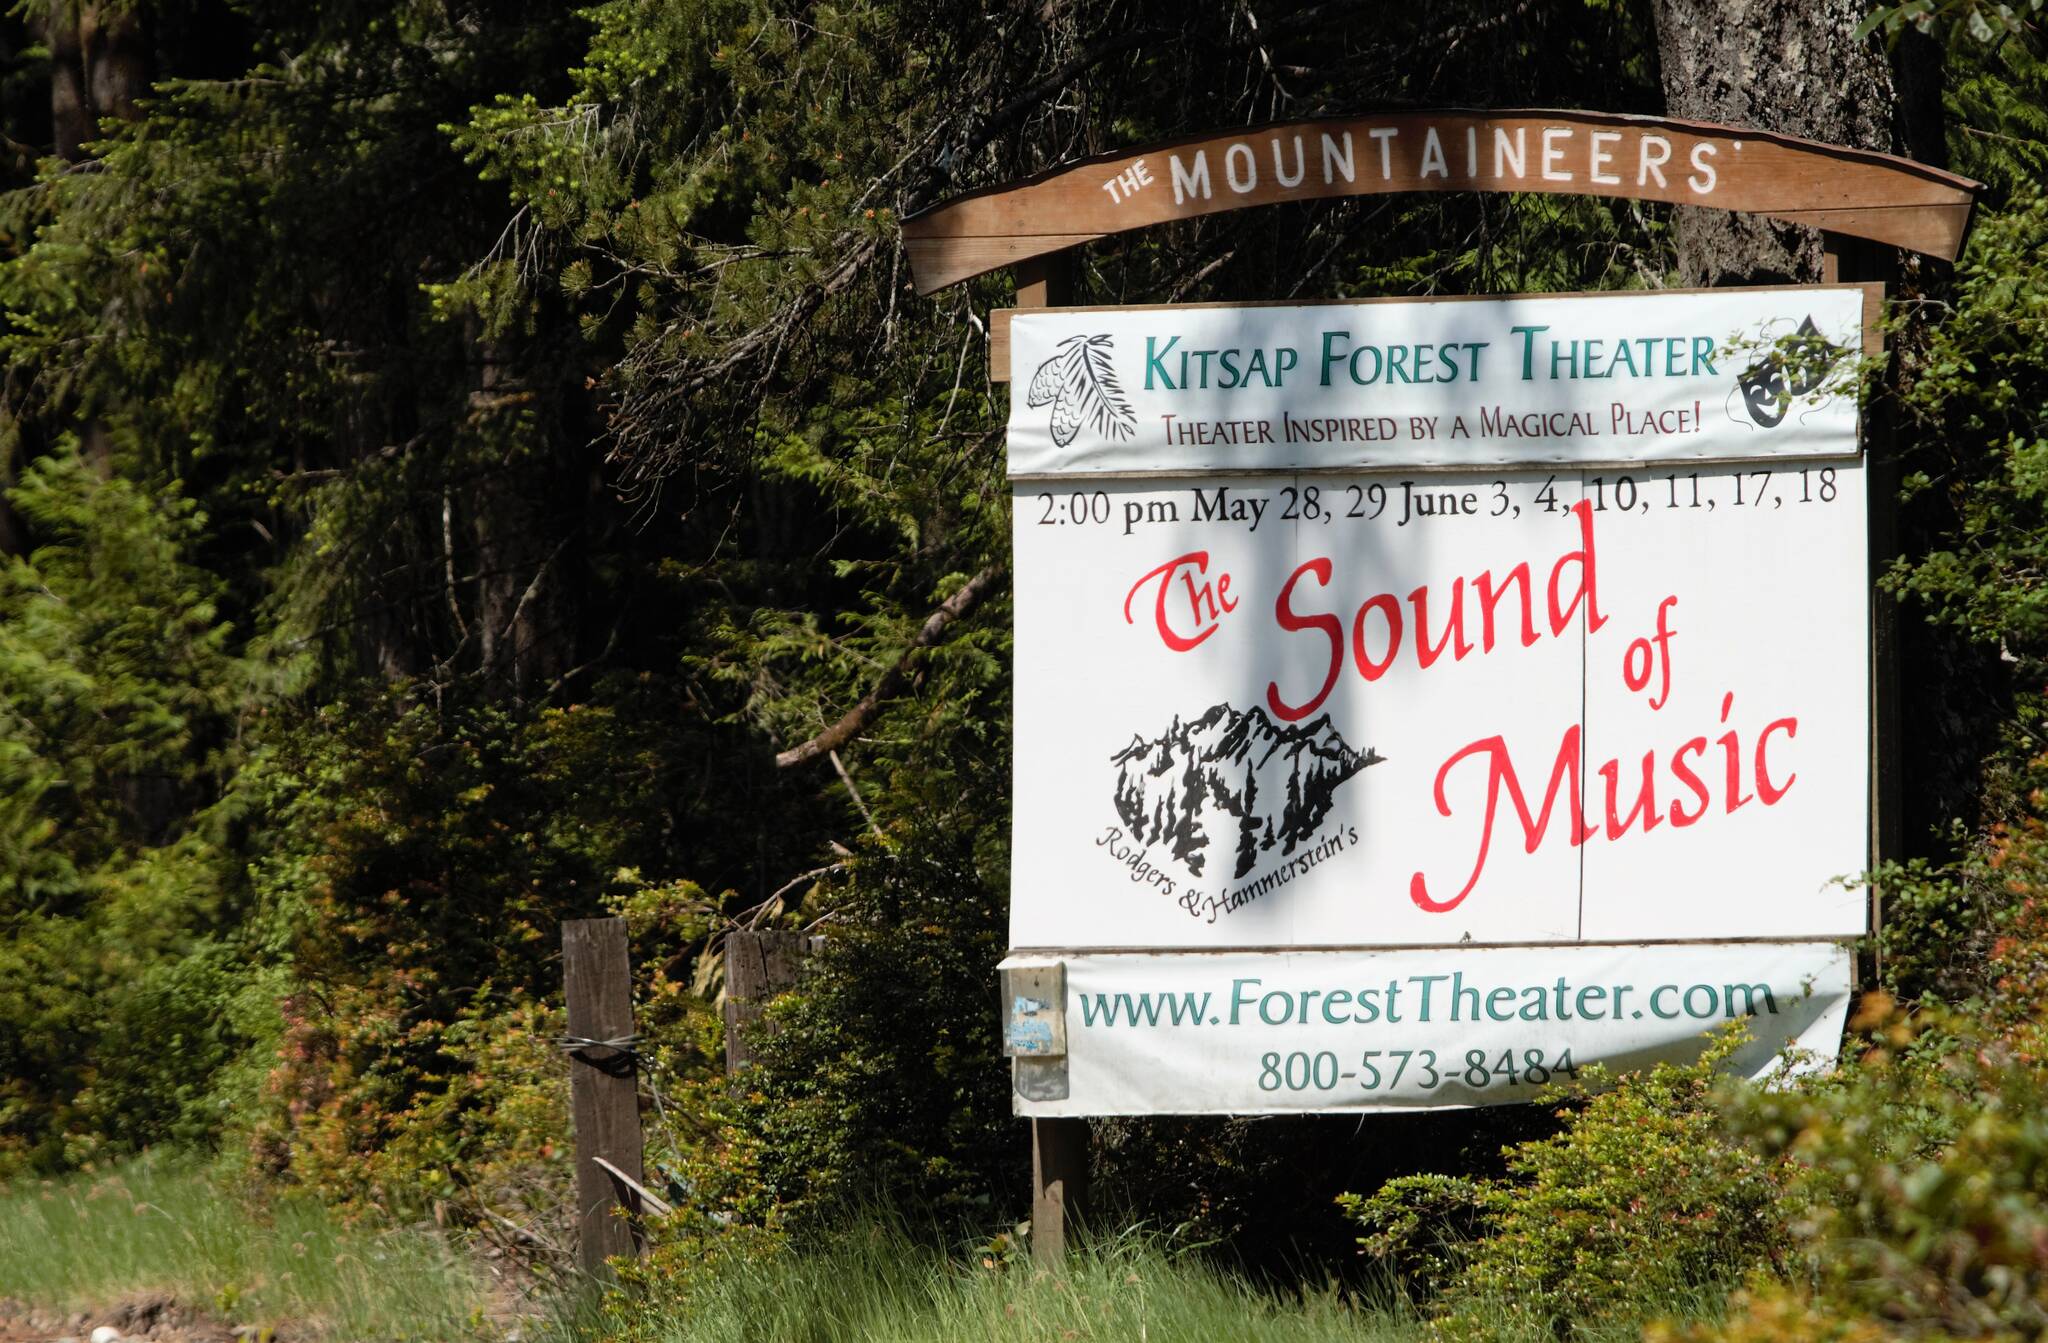 The hills will be alive with The Sound of Music after a court ruling granted The Mountaineers access to the Kitsap Forest Theater. Elisha Meyer/Kitsap News Group